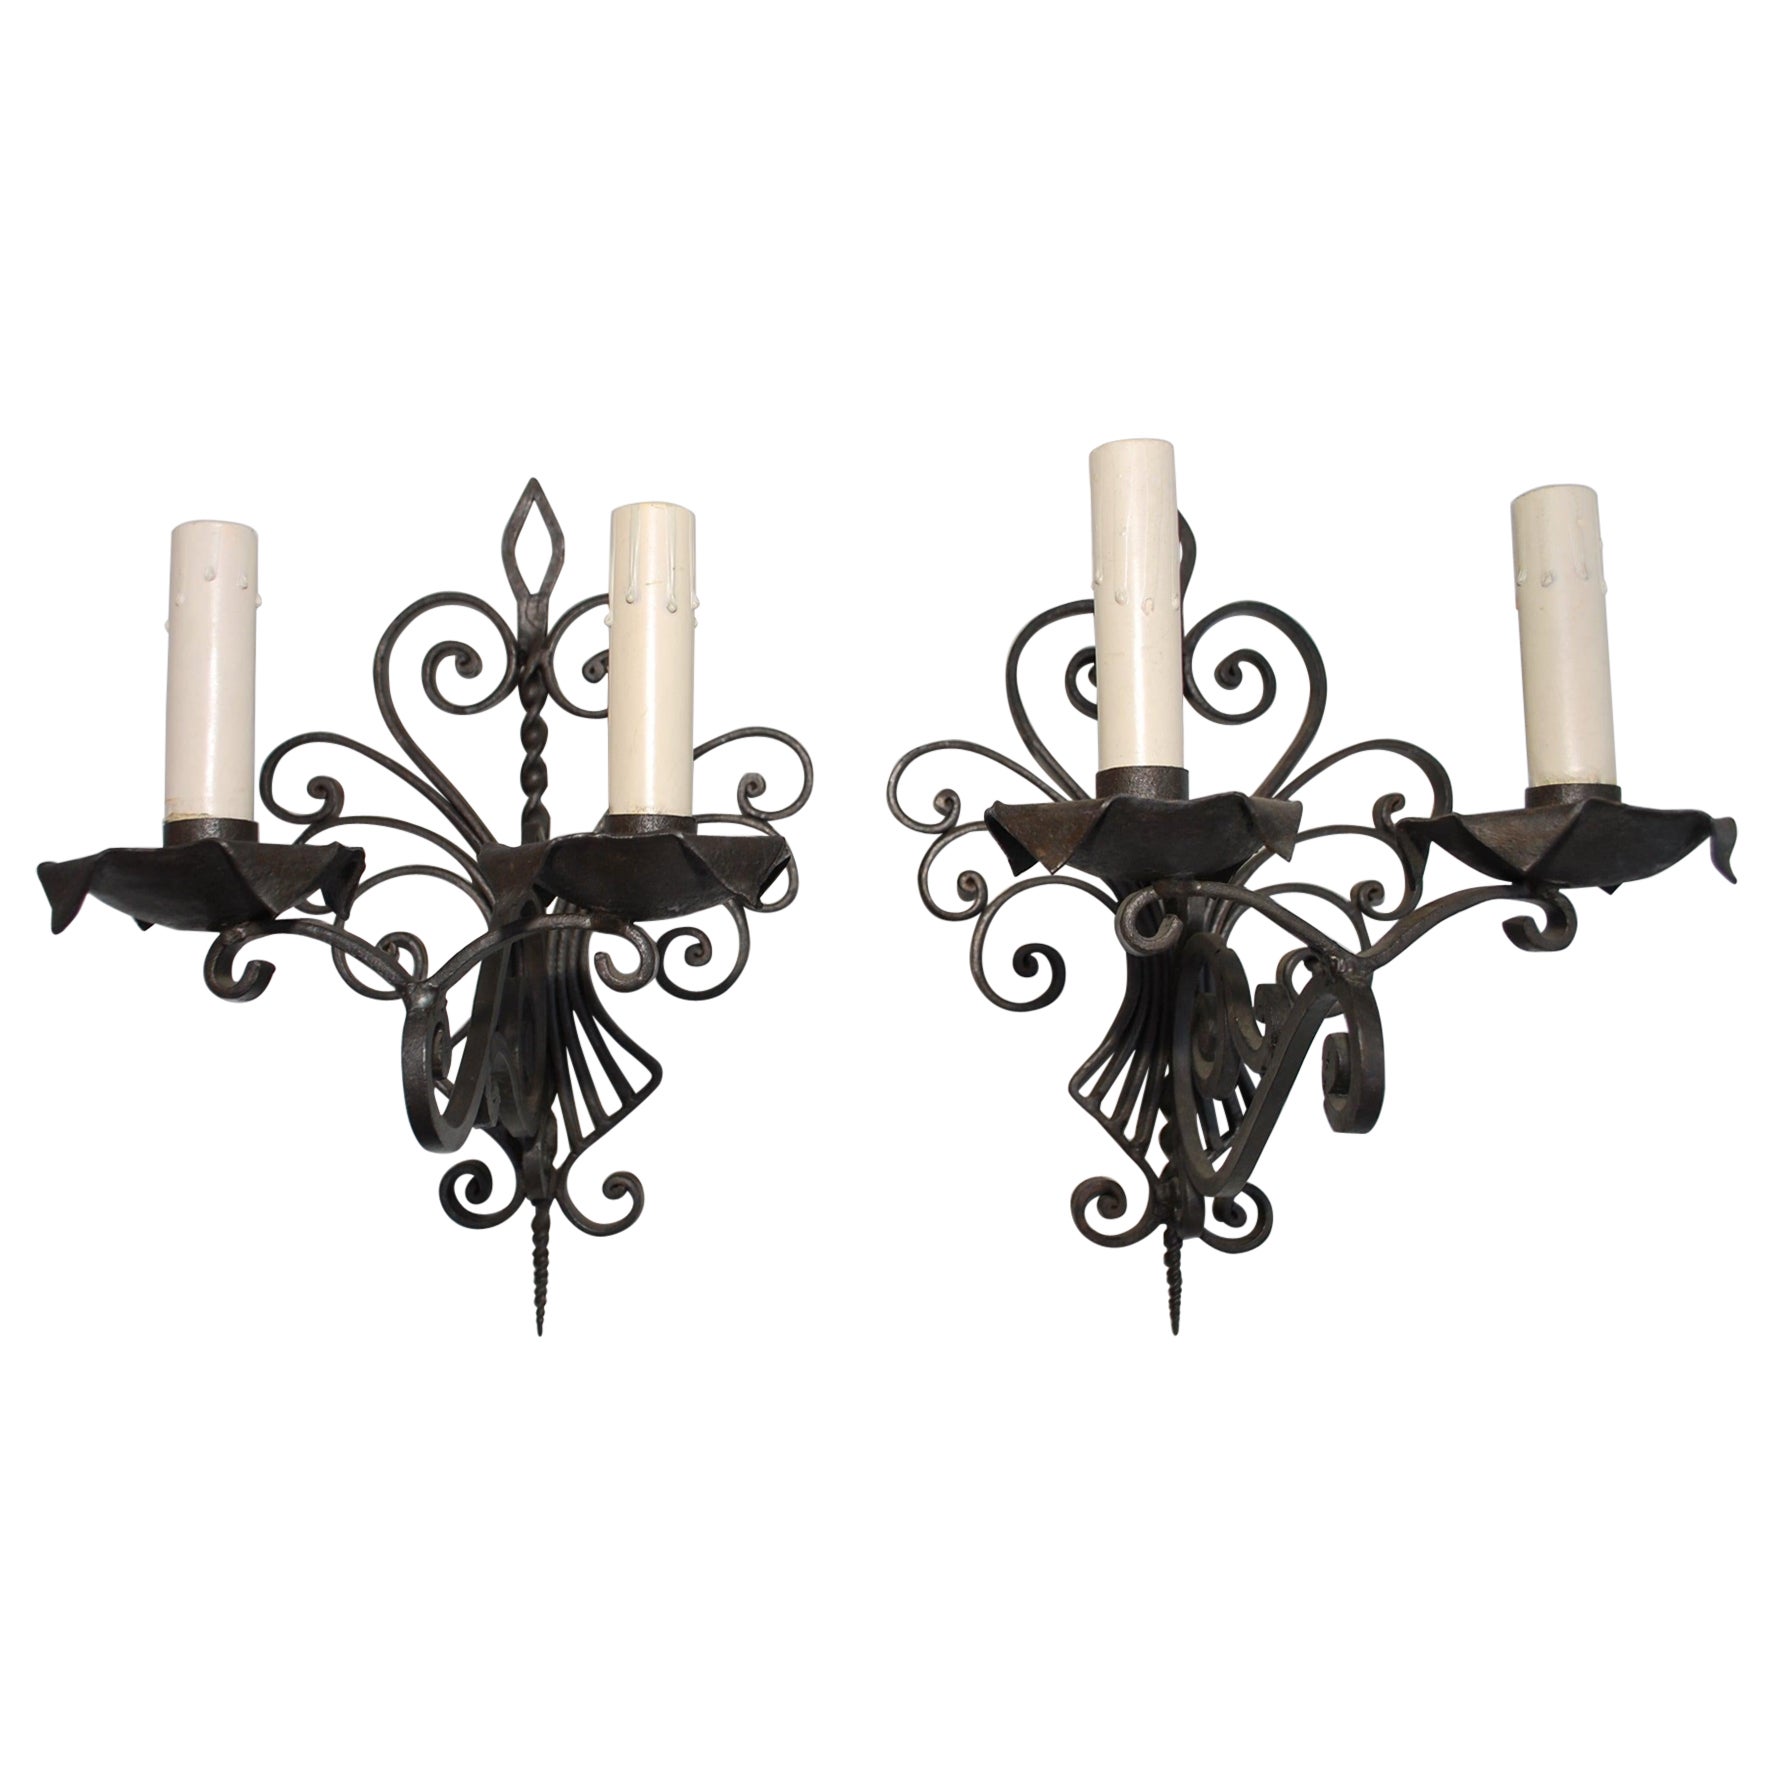 Elegant pair of French 1930's wrought iron sconces For Sale